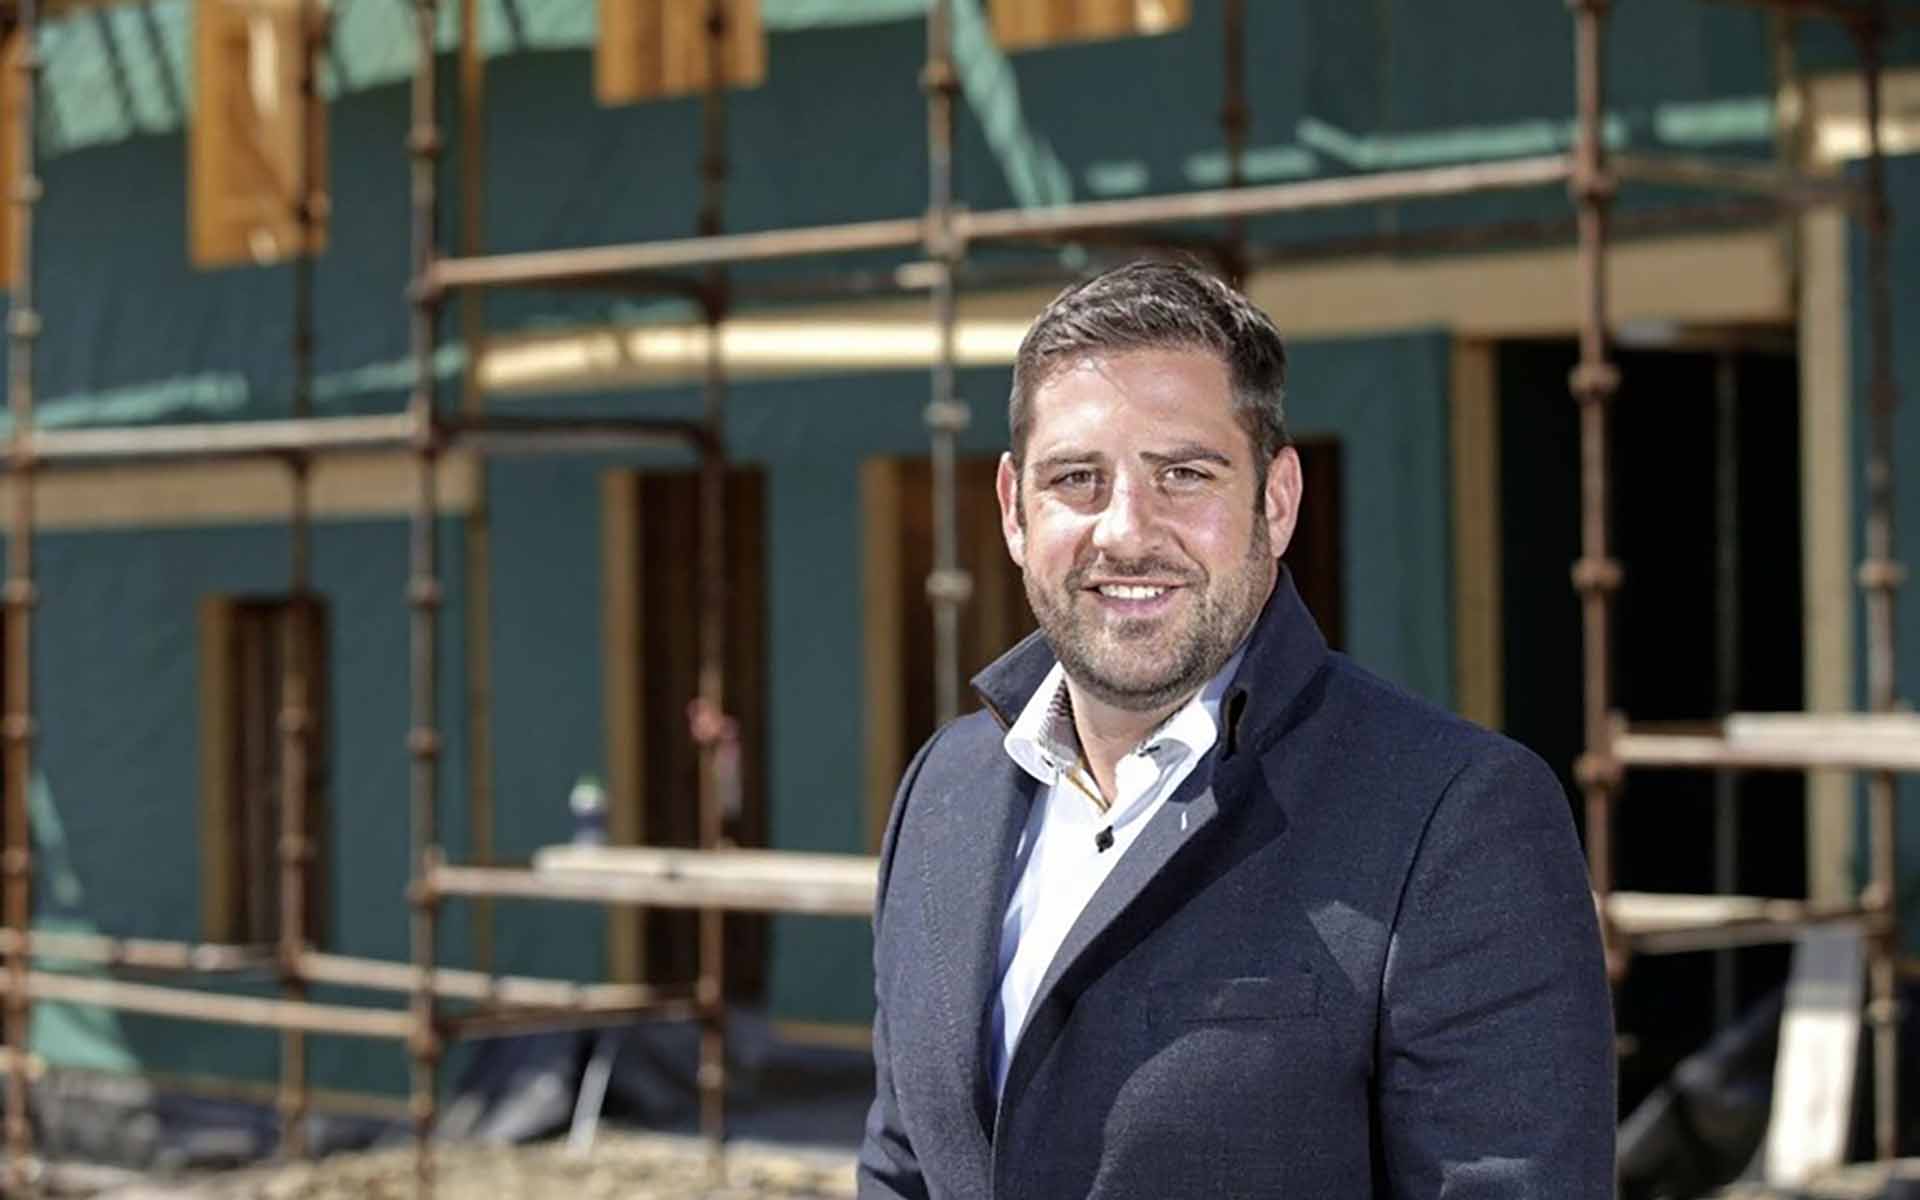 Largest Irish Residential Property Developer Building Homes for Bitcoin